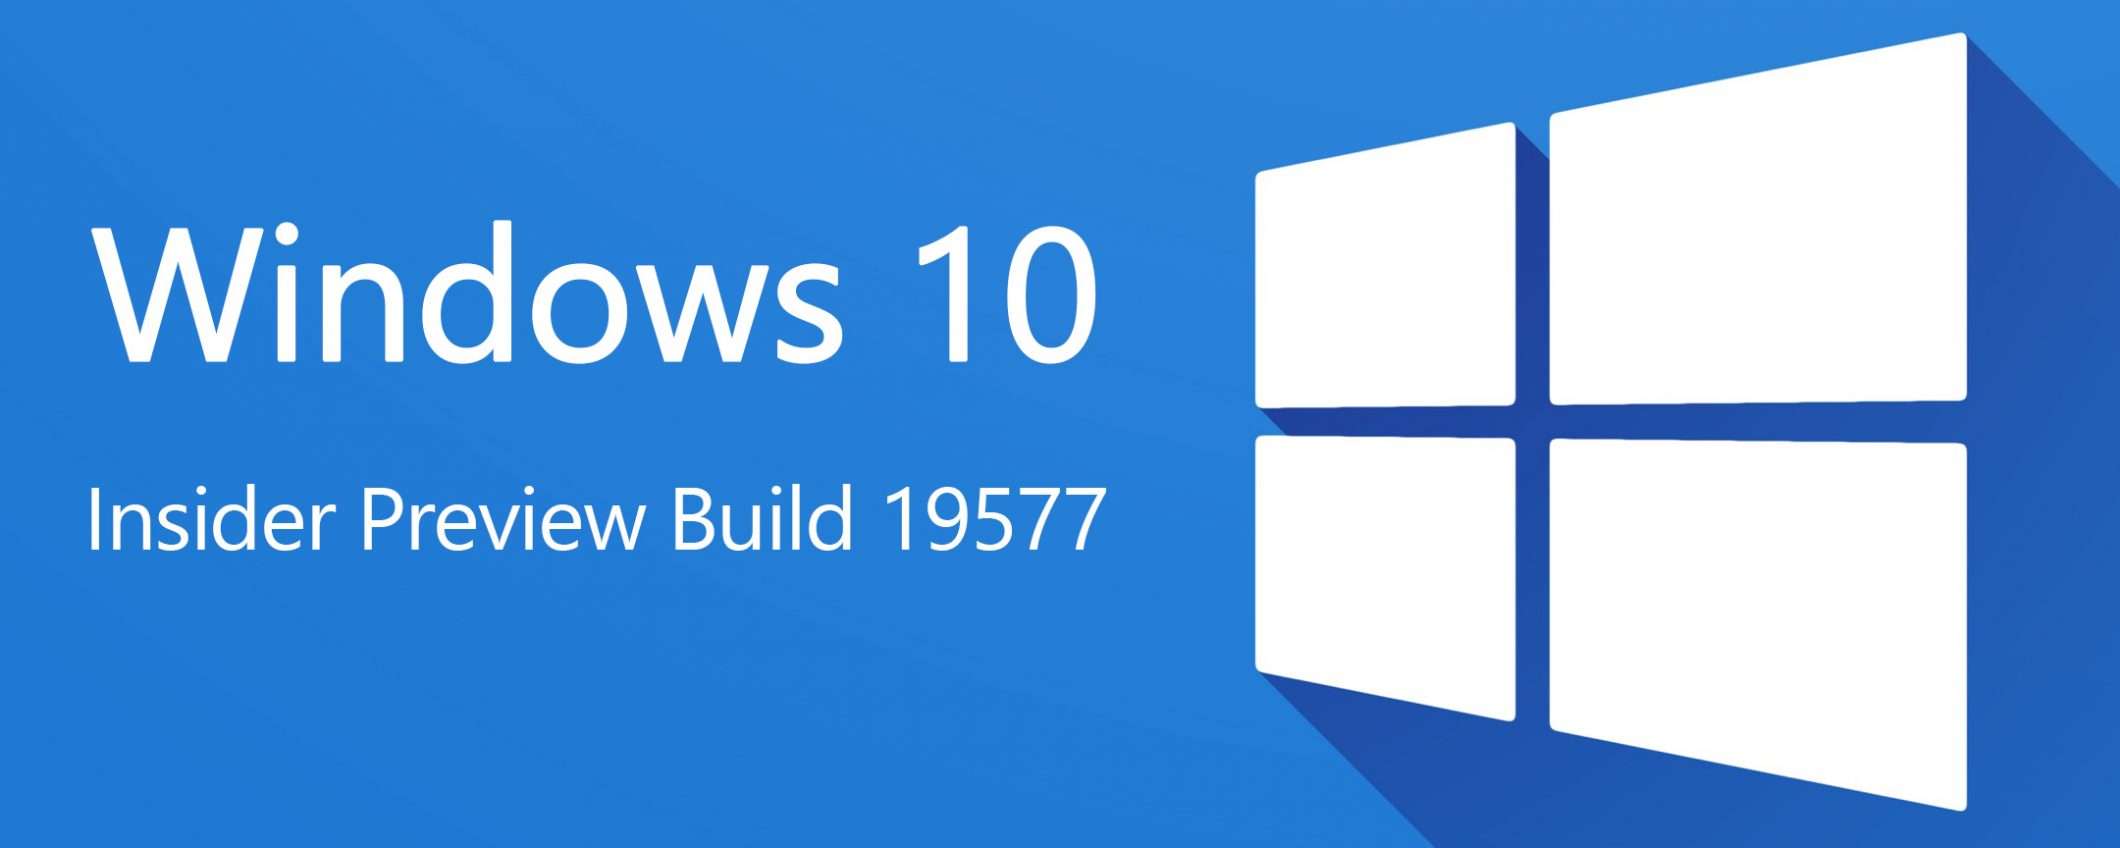 Windows 10 Insider Preview Build 19577 in rollout